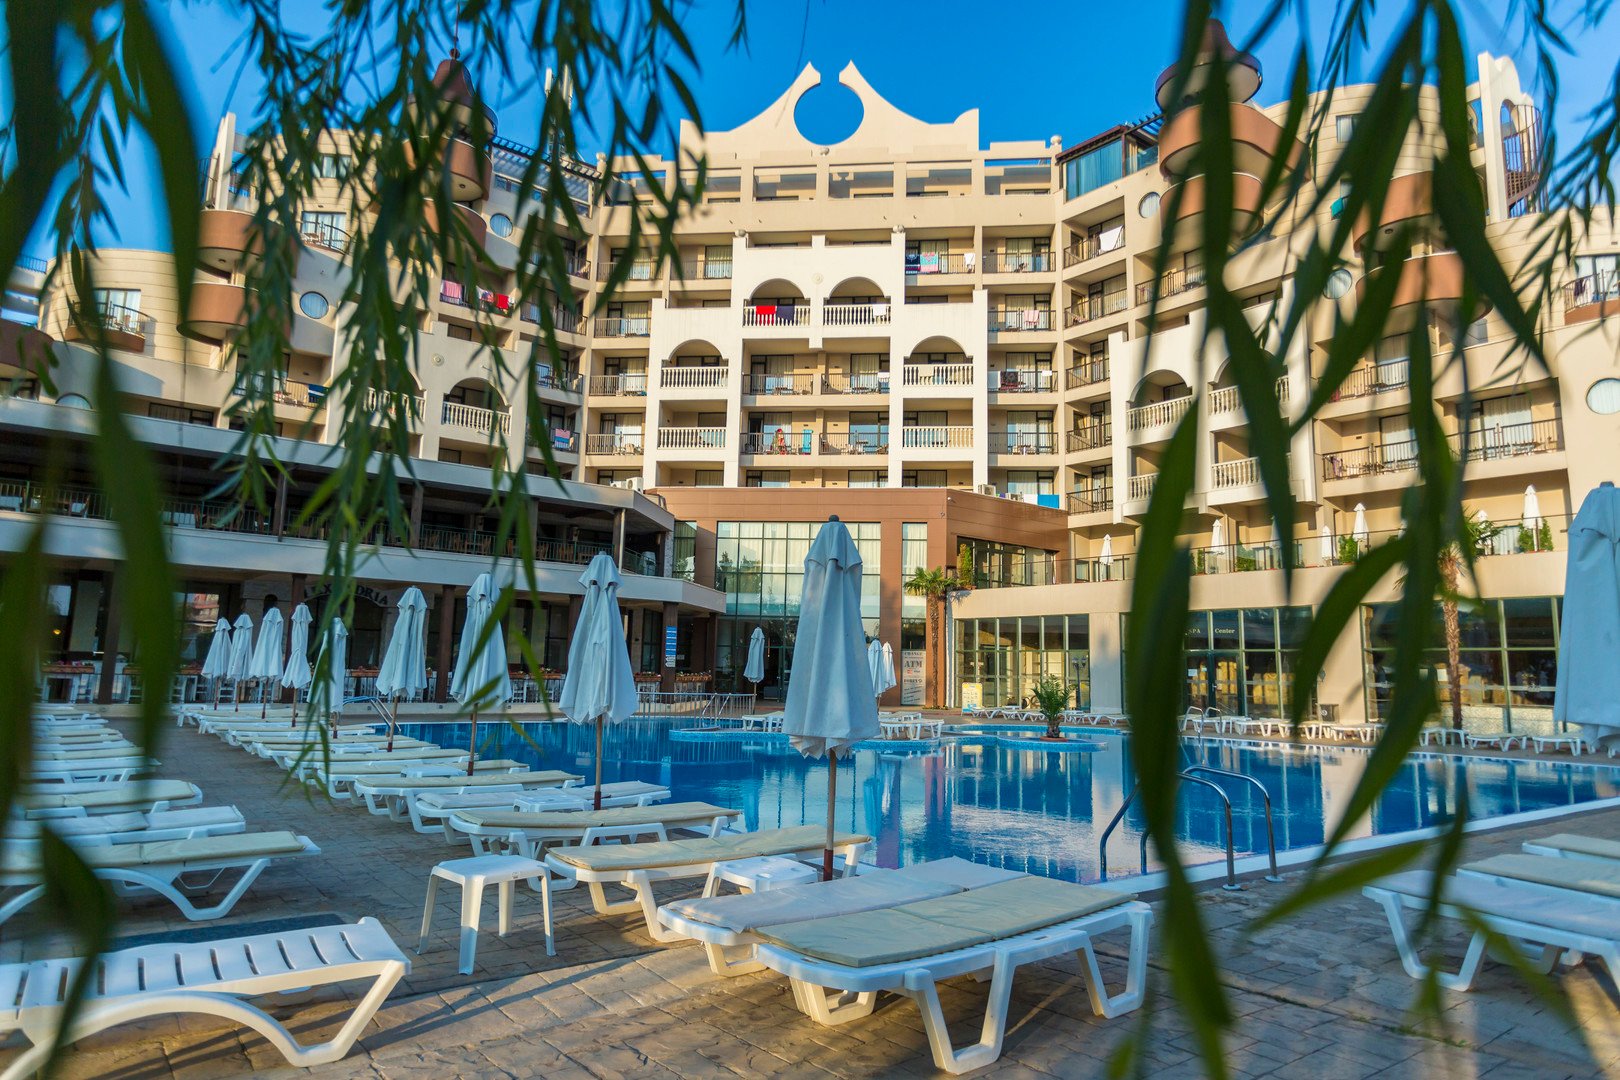 Hotel Imperial-All inclusive